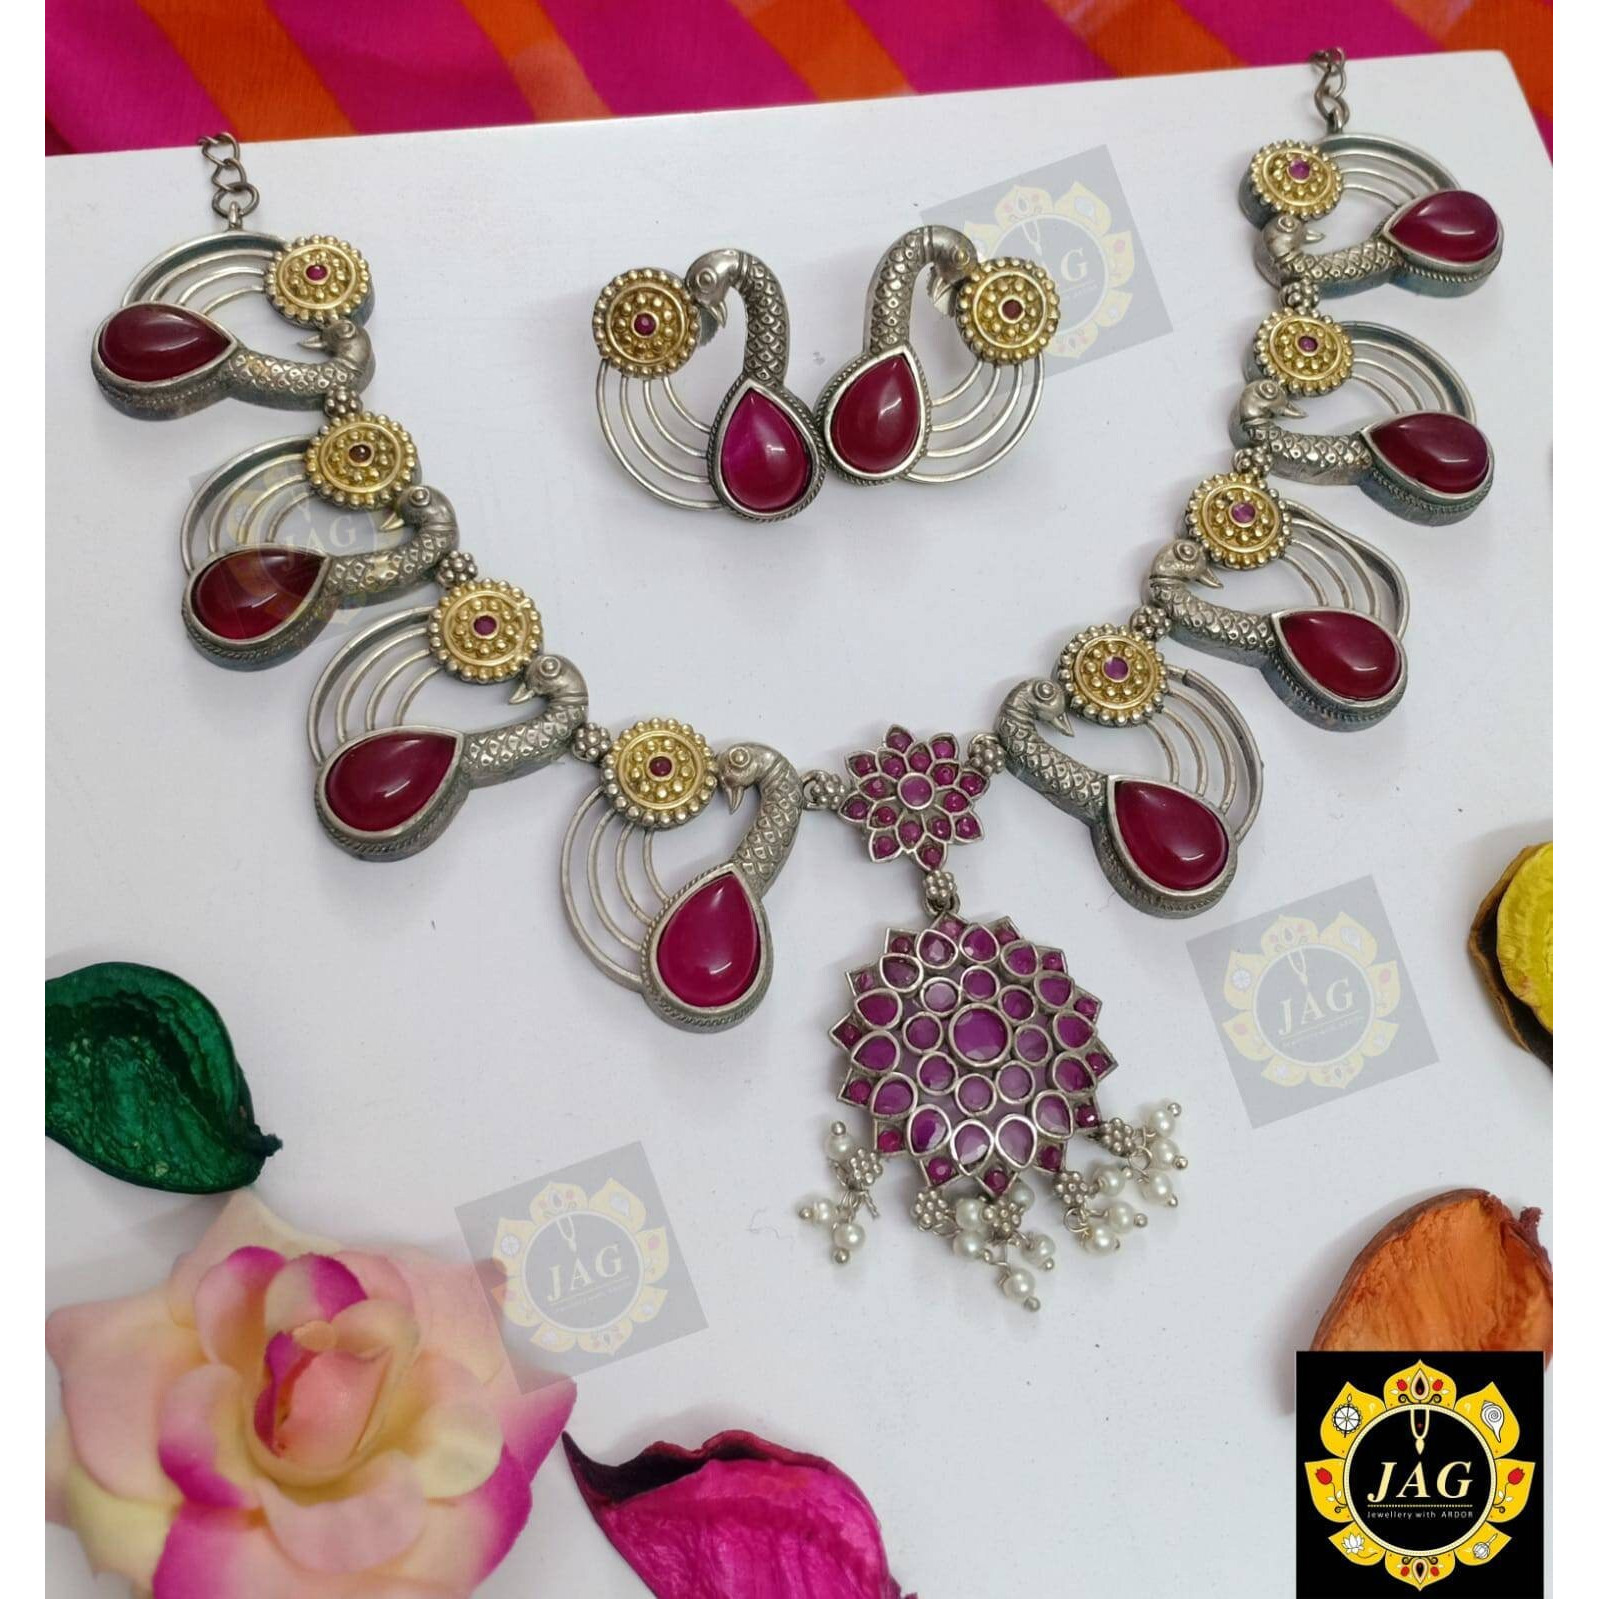 Infuse your beauty and charisma into your everyday life with this stunning dual Tone oxidized jewelry set, which includes a dual-tone long necklace, oxidized earrings, oxidized bangles, rings, and a nose pin combination. Make a fashion statement by wearing it with everything from a saree to a t-shirt and jeans. This oxidized jewelry is perfect for both day and night. Buy this Indian silver jewelry from Vastrabhushan today. You may buy it for yourself or even gift to someone you admire. Remember: